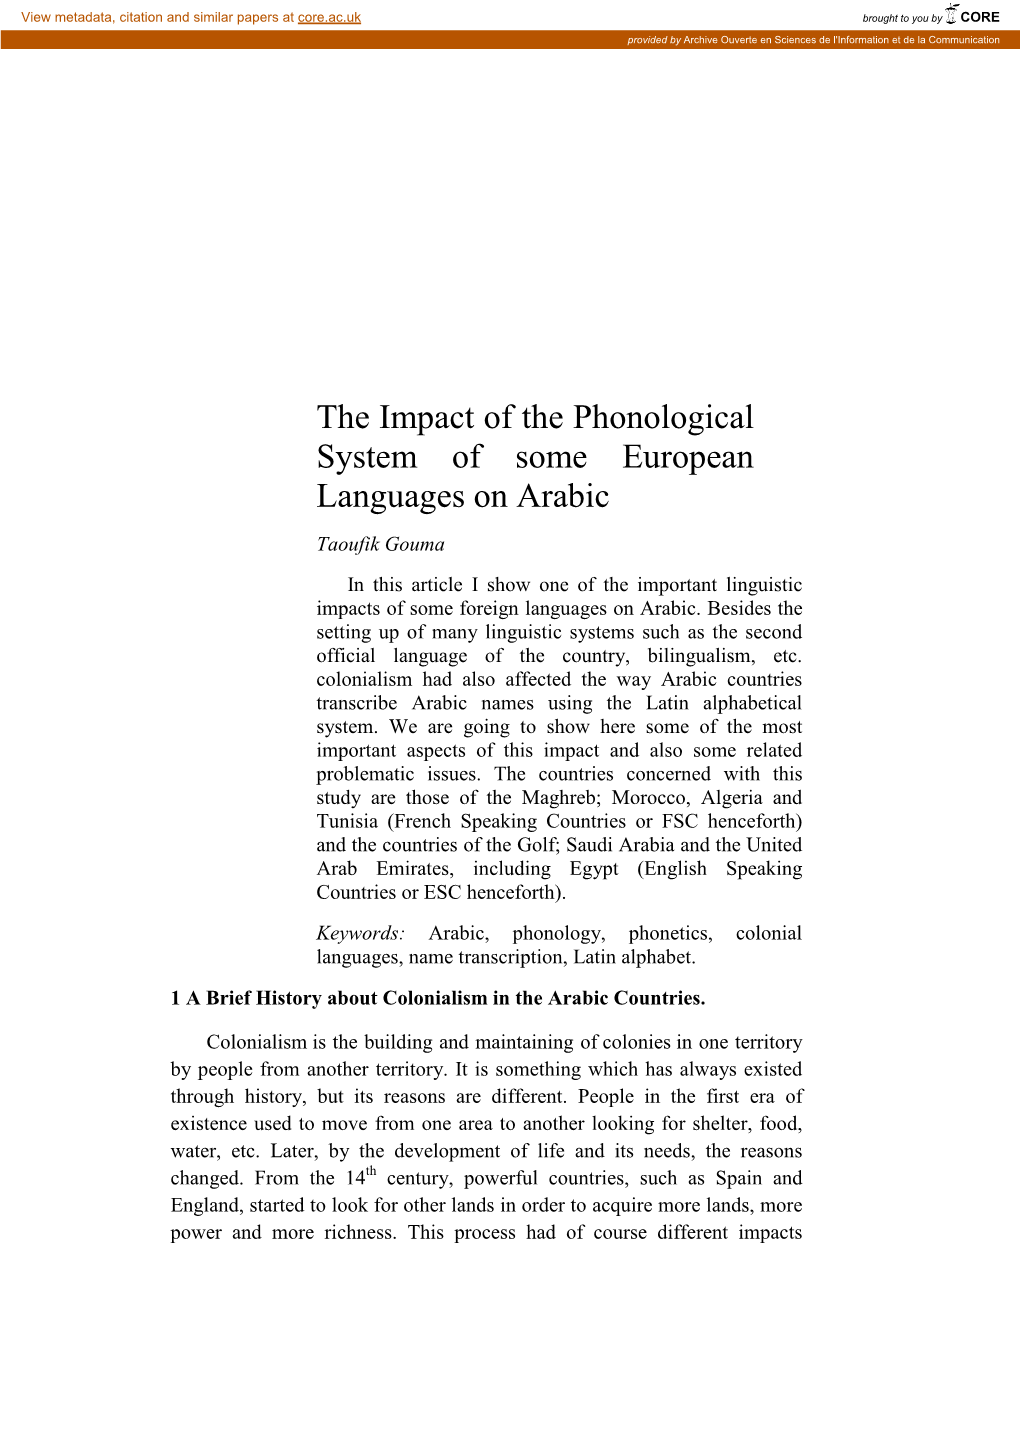 The Impact of the Phonological System of Some European